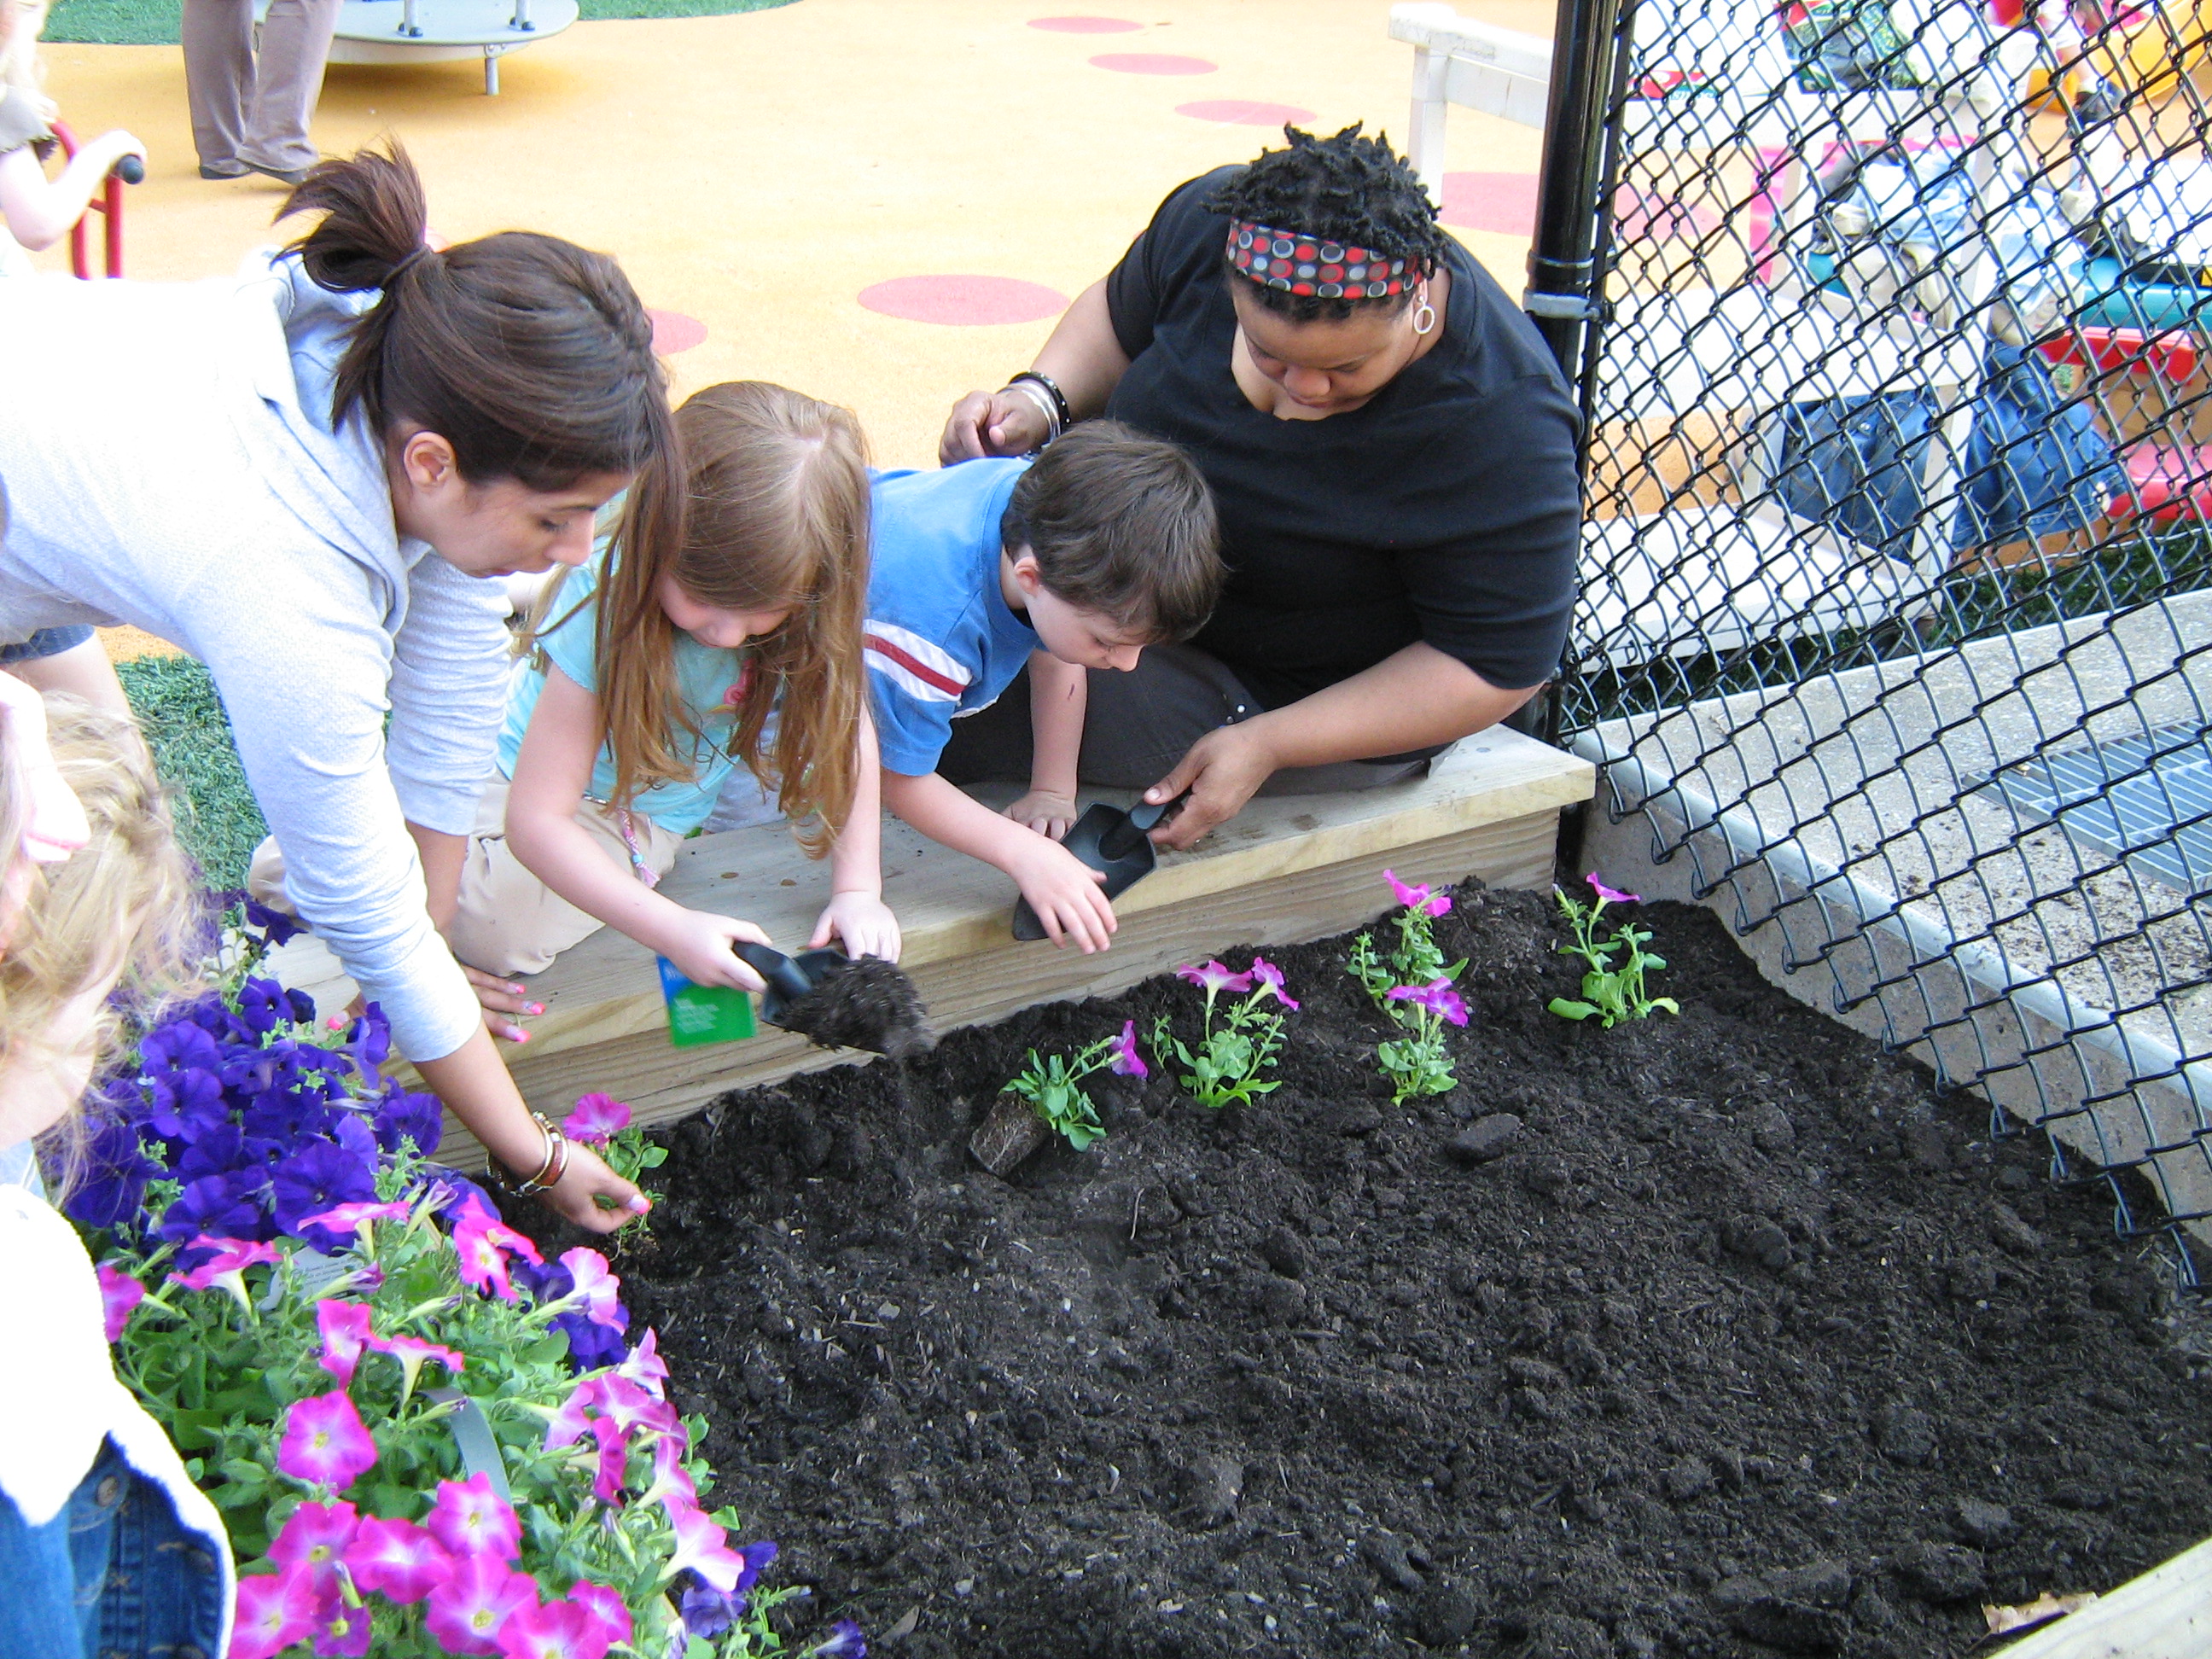 Child care providers helping children plants flowers in raised garden bed